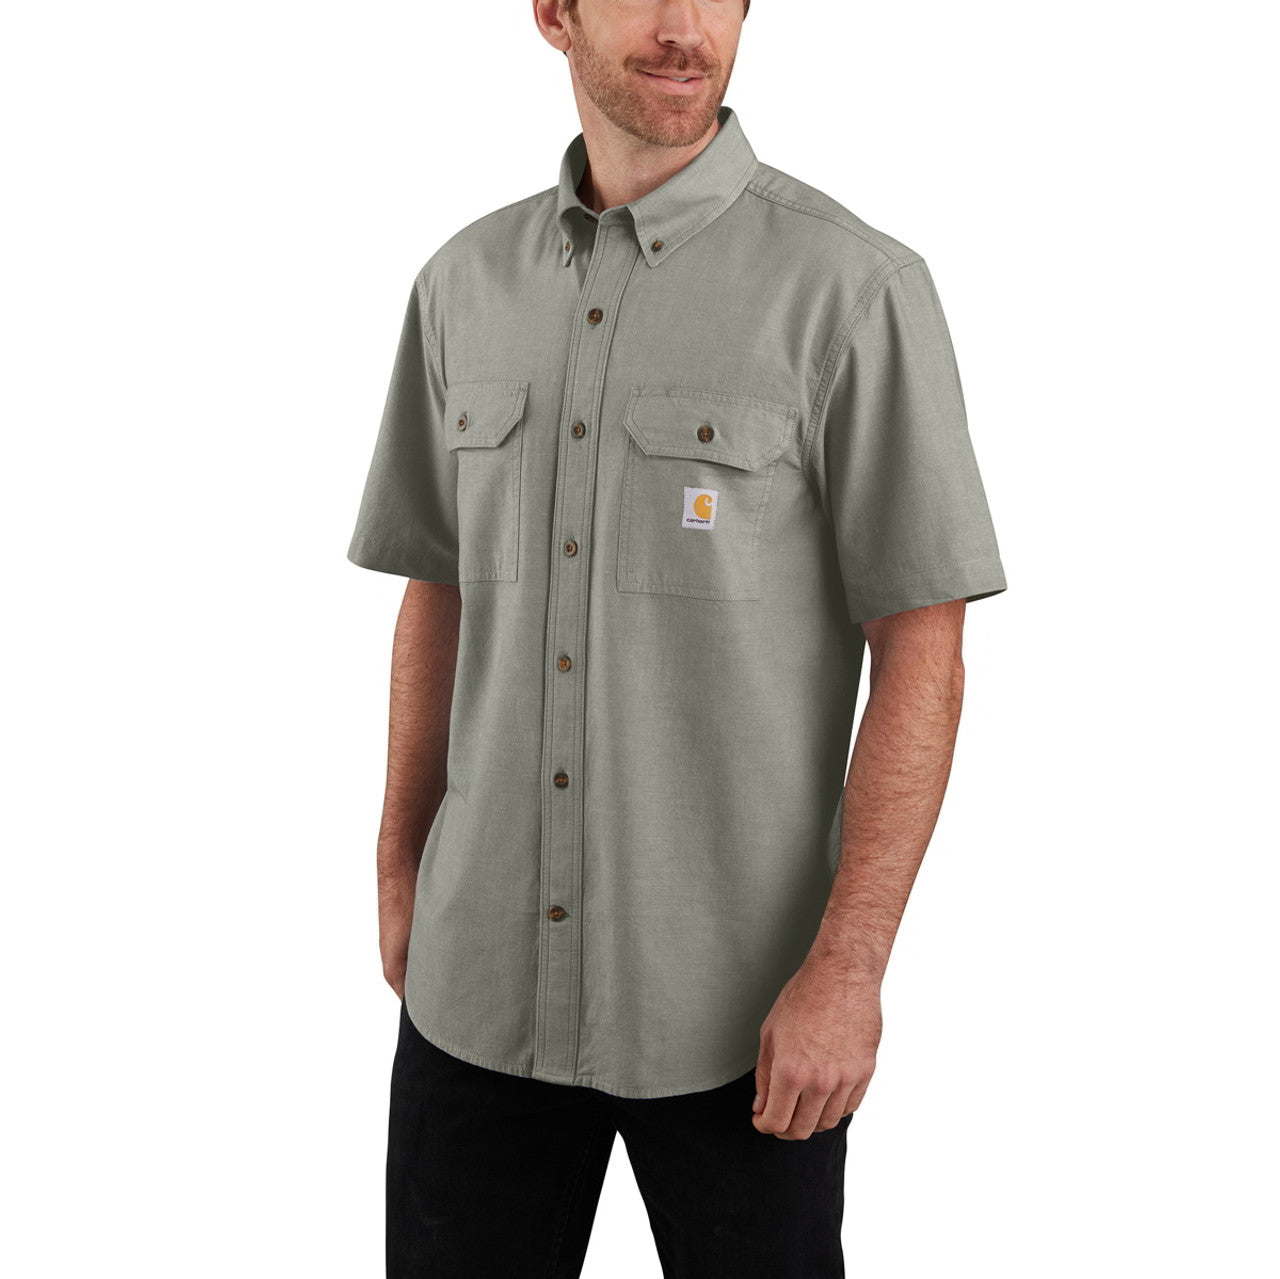 Loose Fit Midweight Chambray Short-Sleeve Shirt, Dusty Olive